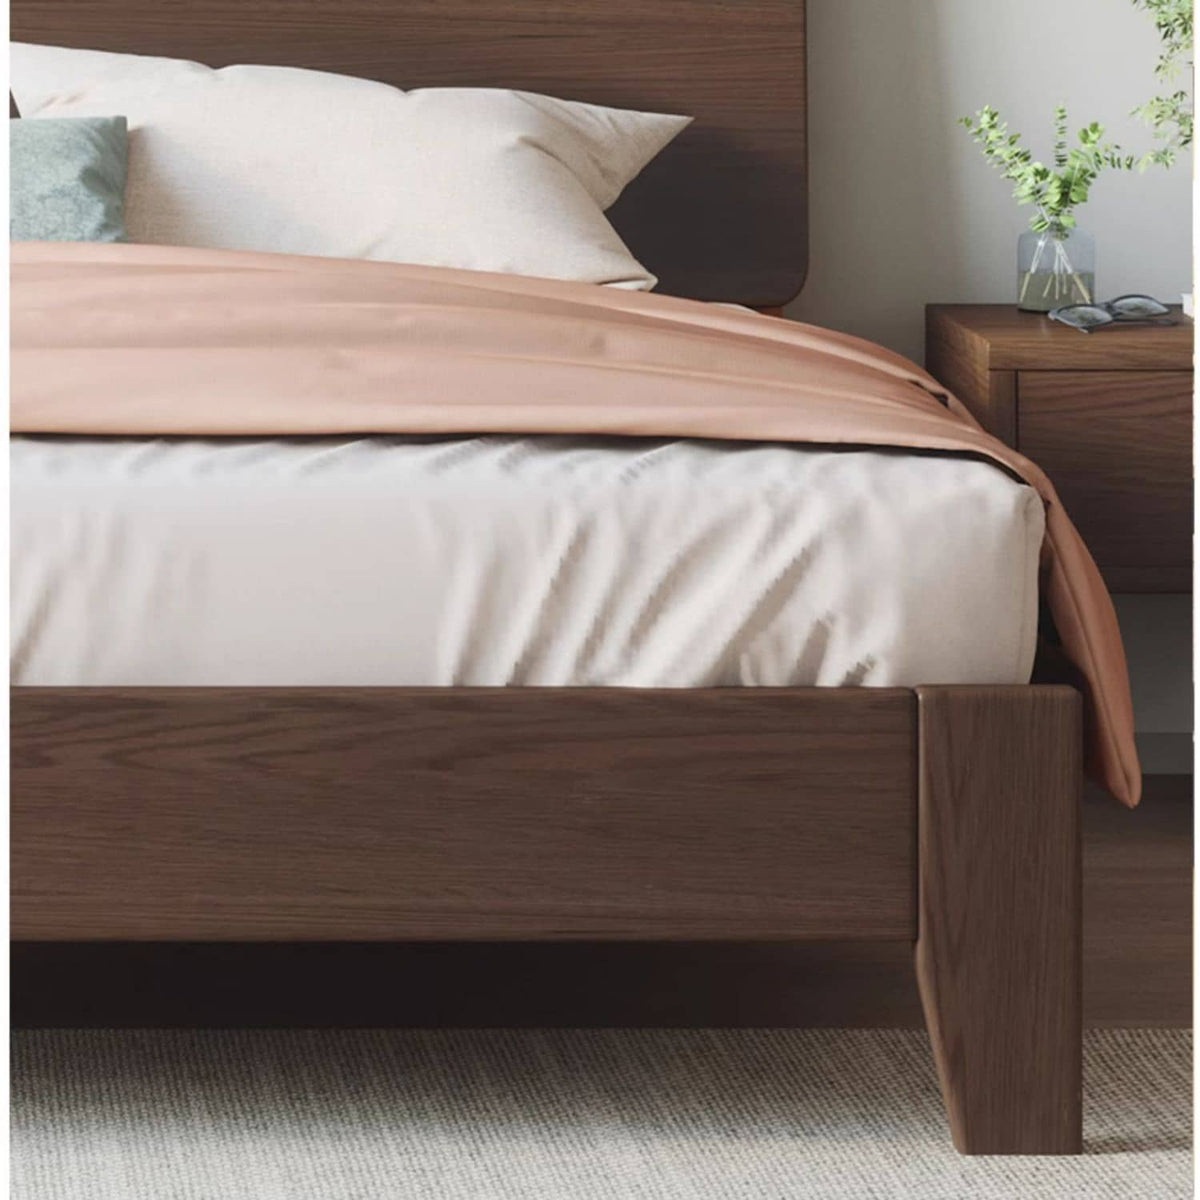 Luxurious Solid Brown Rubberwood Pine Bed Frame - Stylish & Durable Design hmak-236